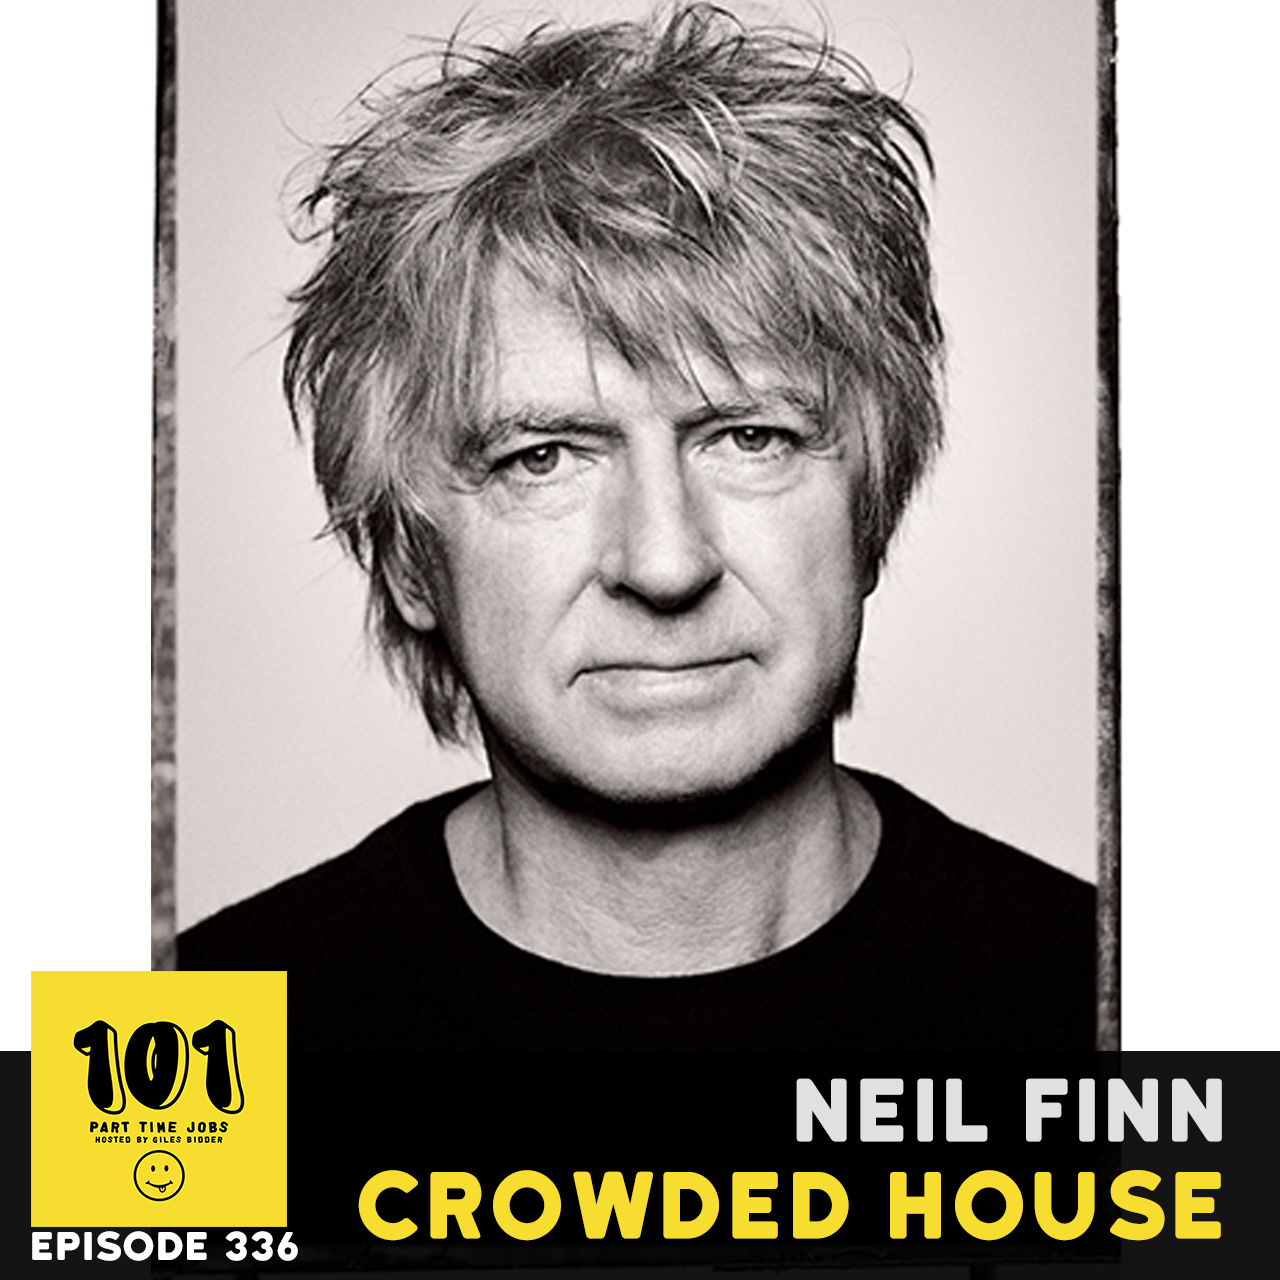 Episode Neil Finn (Crowded House) - Fleetwood Mac and working at the morgue